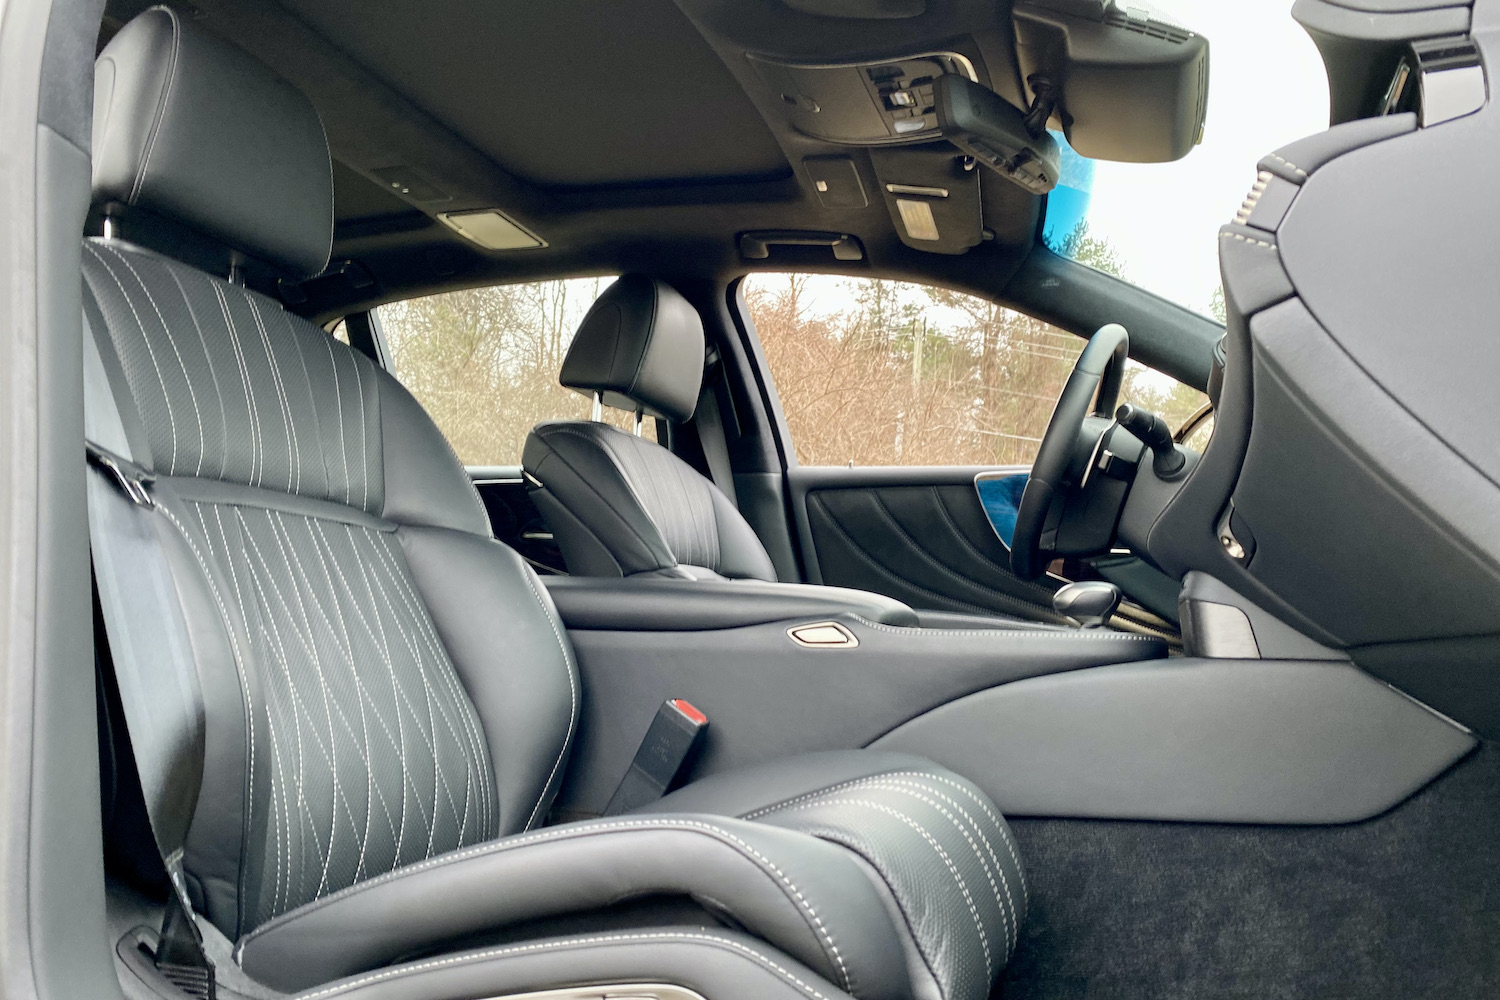 The front passenger seat in the 2021 Lexus LS500 from outside with trees in the back.